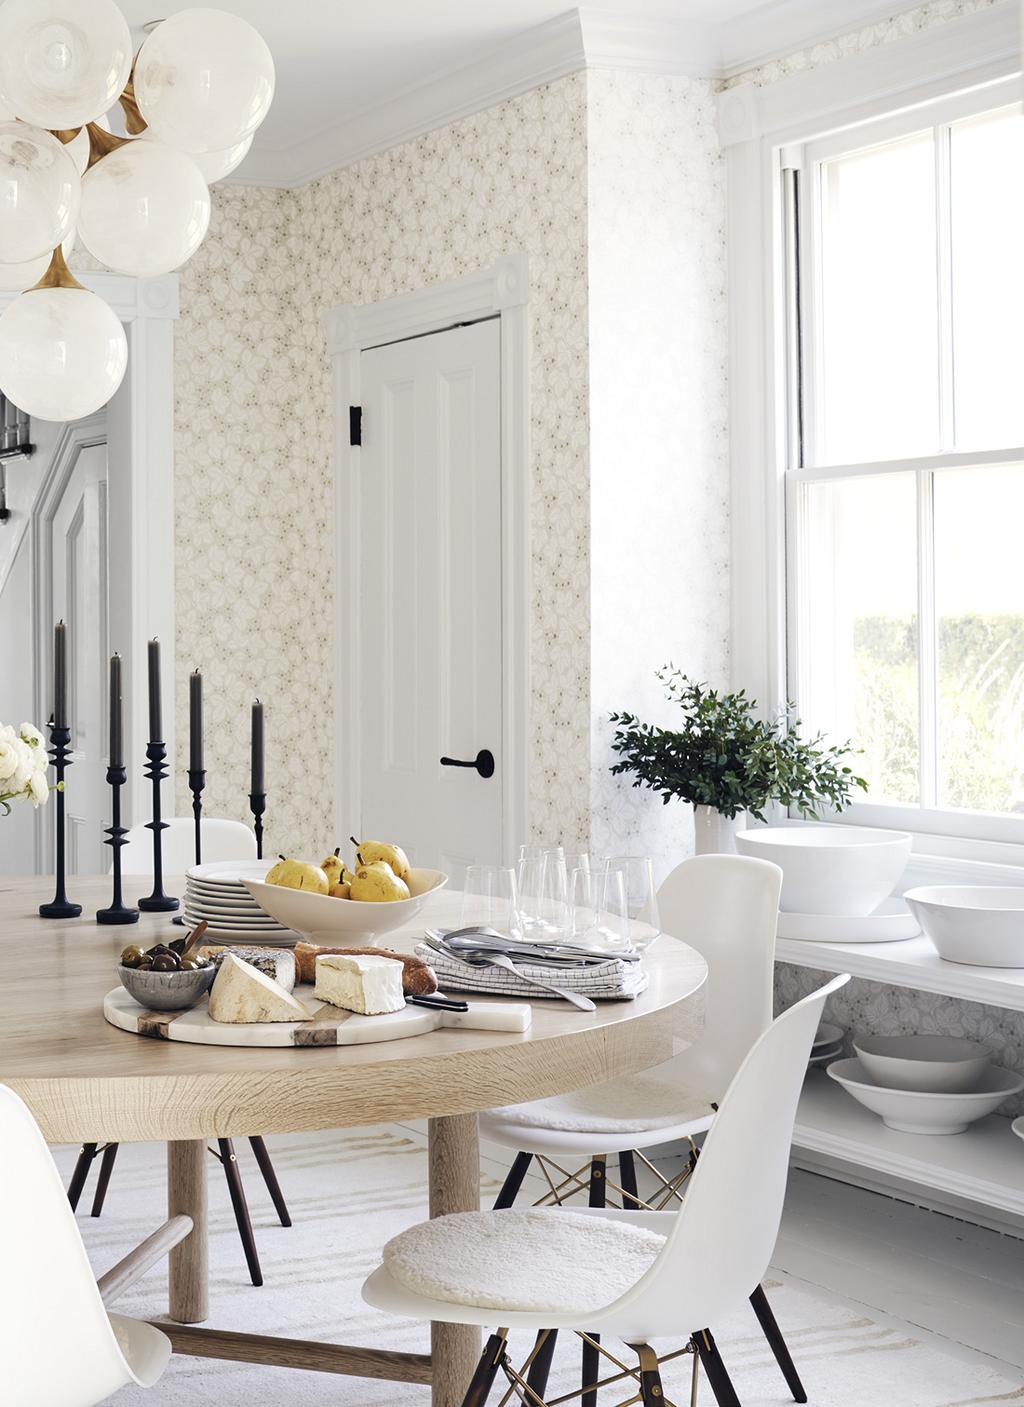 Designer Liliane Hart transformed a seaside Victorian home in Sag Harbor, New York, with Scandinavian touches, including this dining room wallpapered in a strawberry-plant print by the Swedish brand